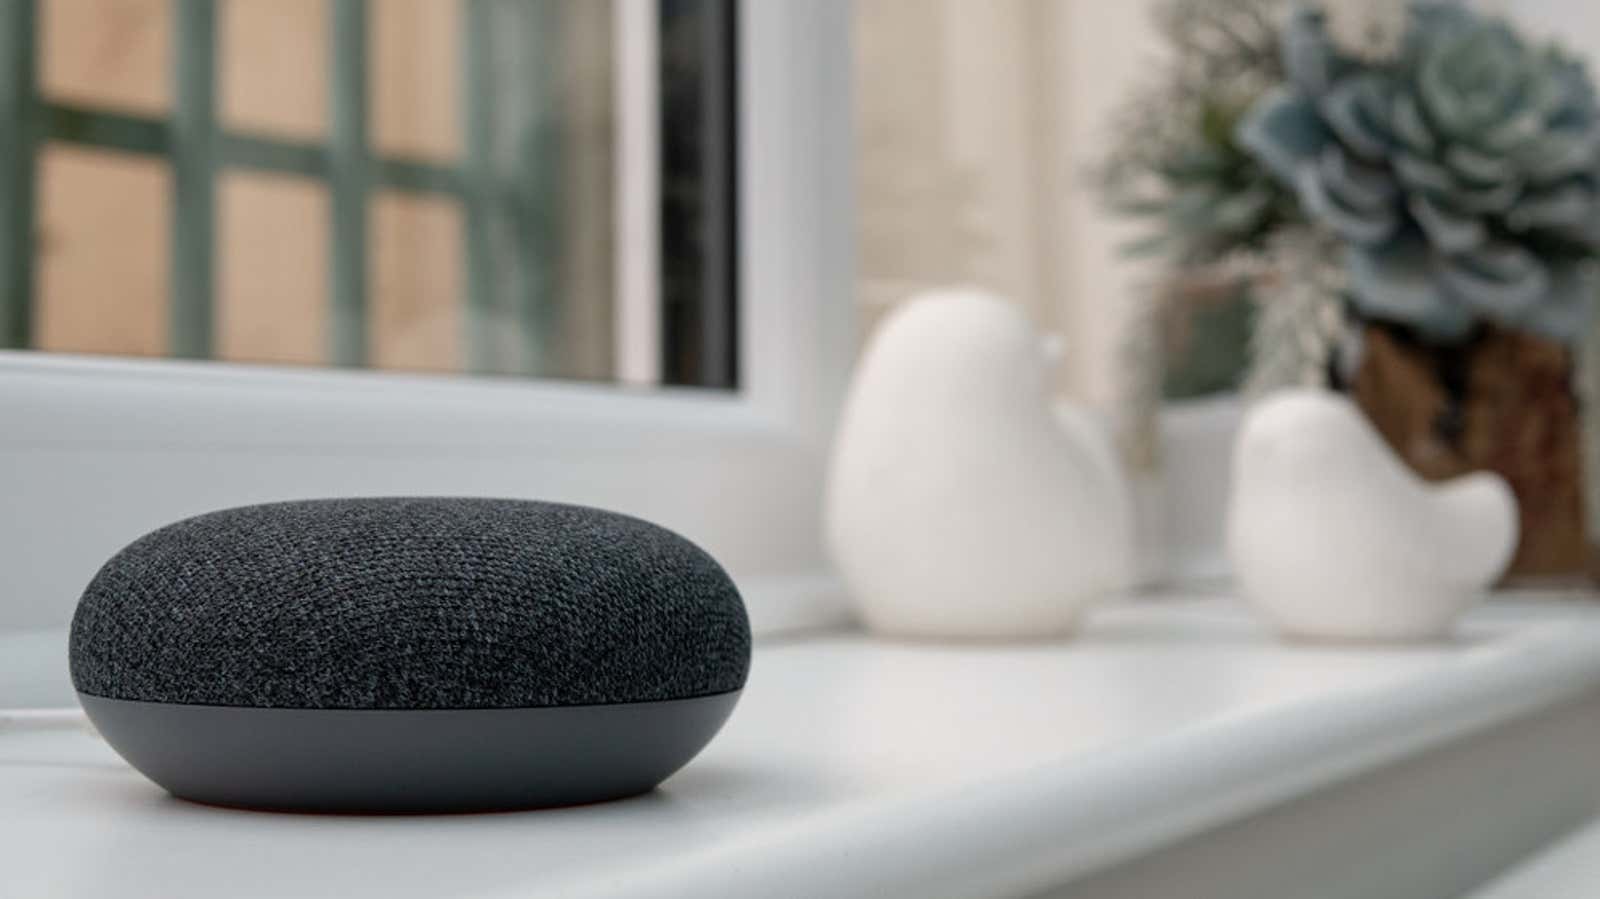 How to Get Free Google Home Mini From Spotify Resourceful Man